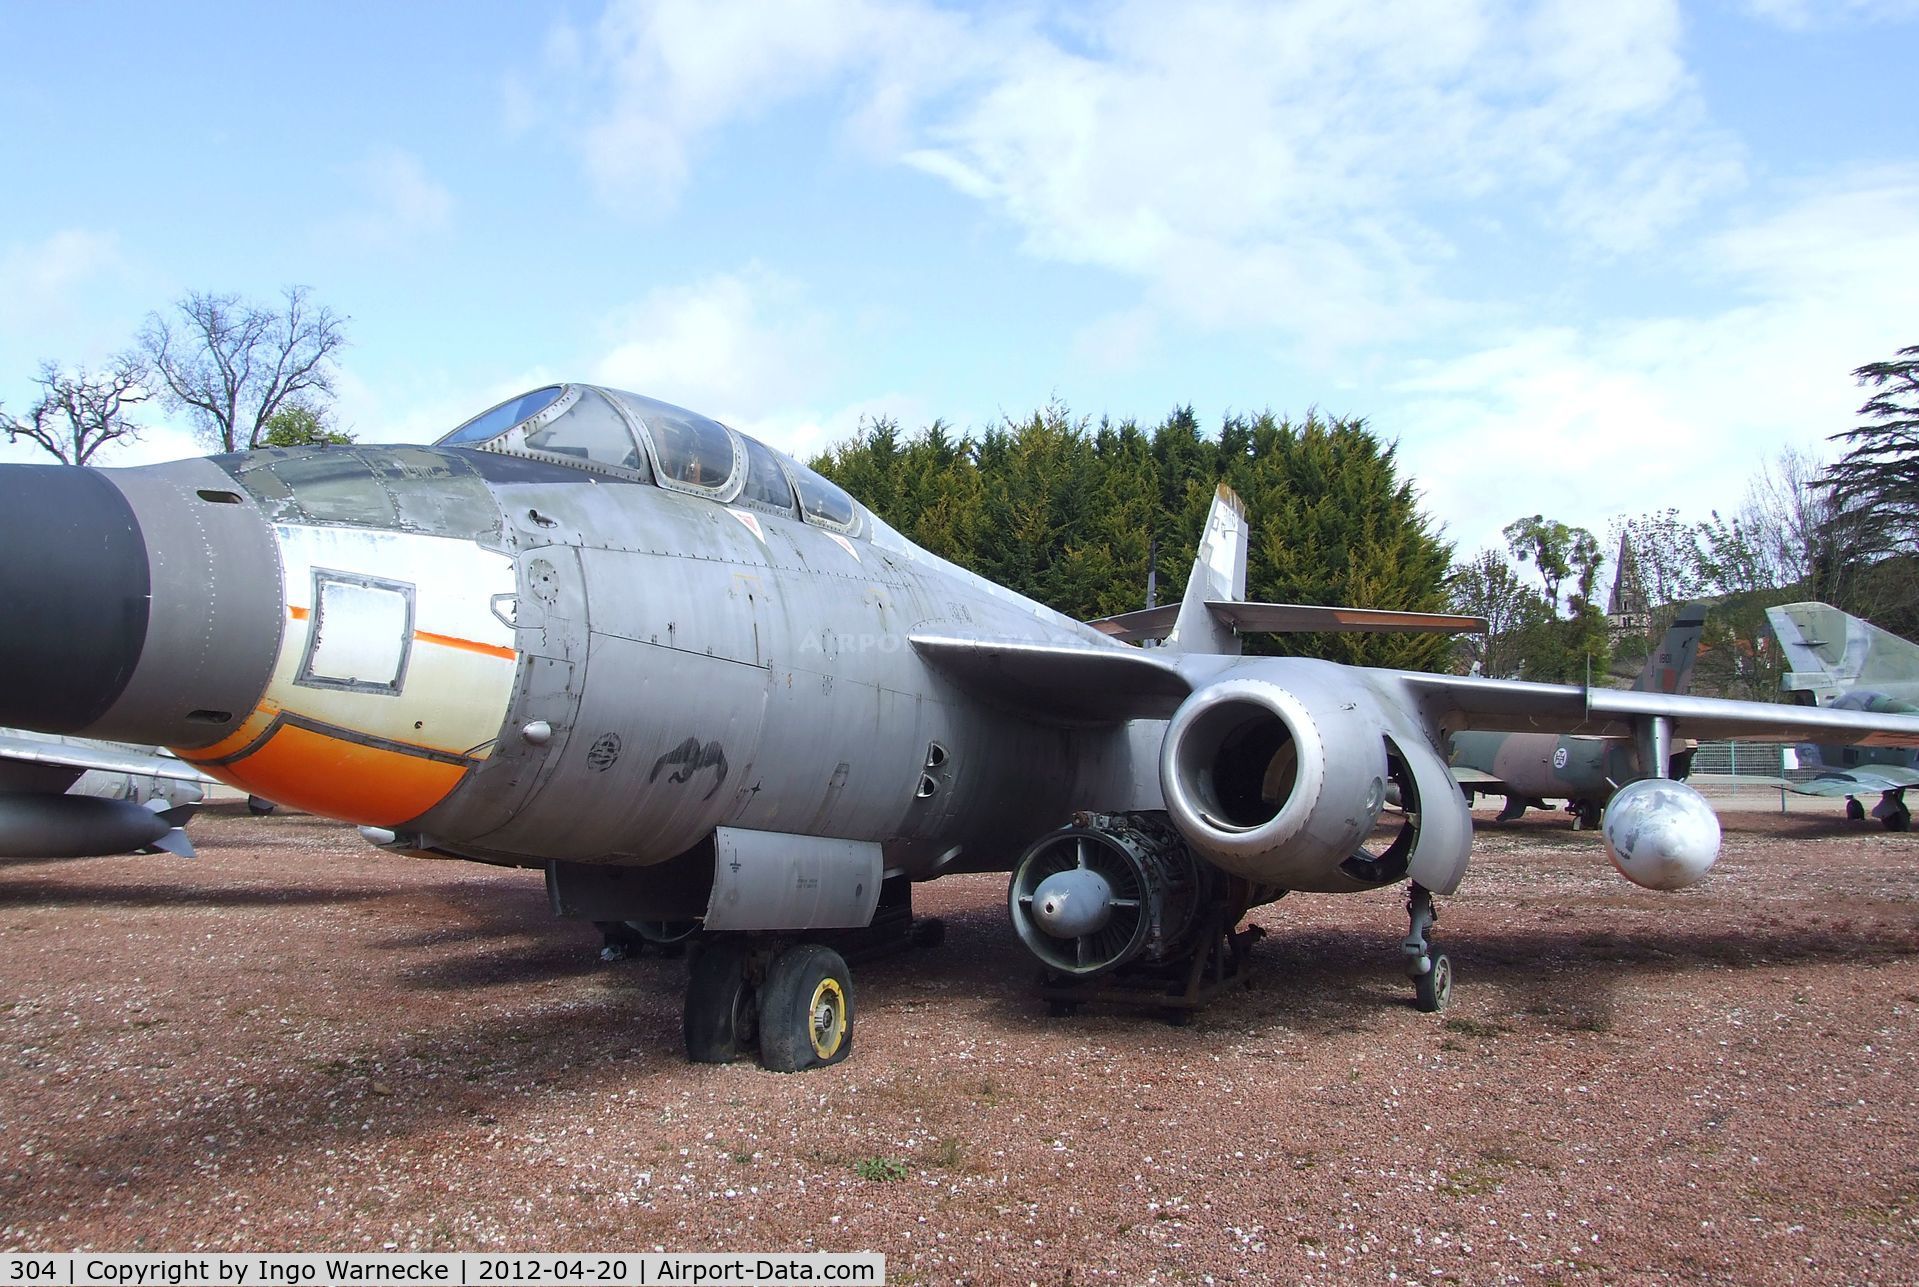 304, 1956 Sud Aviation SO.4050 Vautour IIN C/N 11, Sud-Ouest SO.4050 Vautour II N (radar-testbed at CEAM/CEV) at the Musee de l'Aviation du Chateau, Savigny-les-Beaune